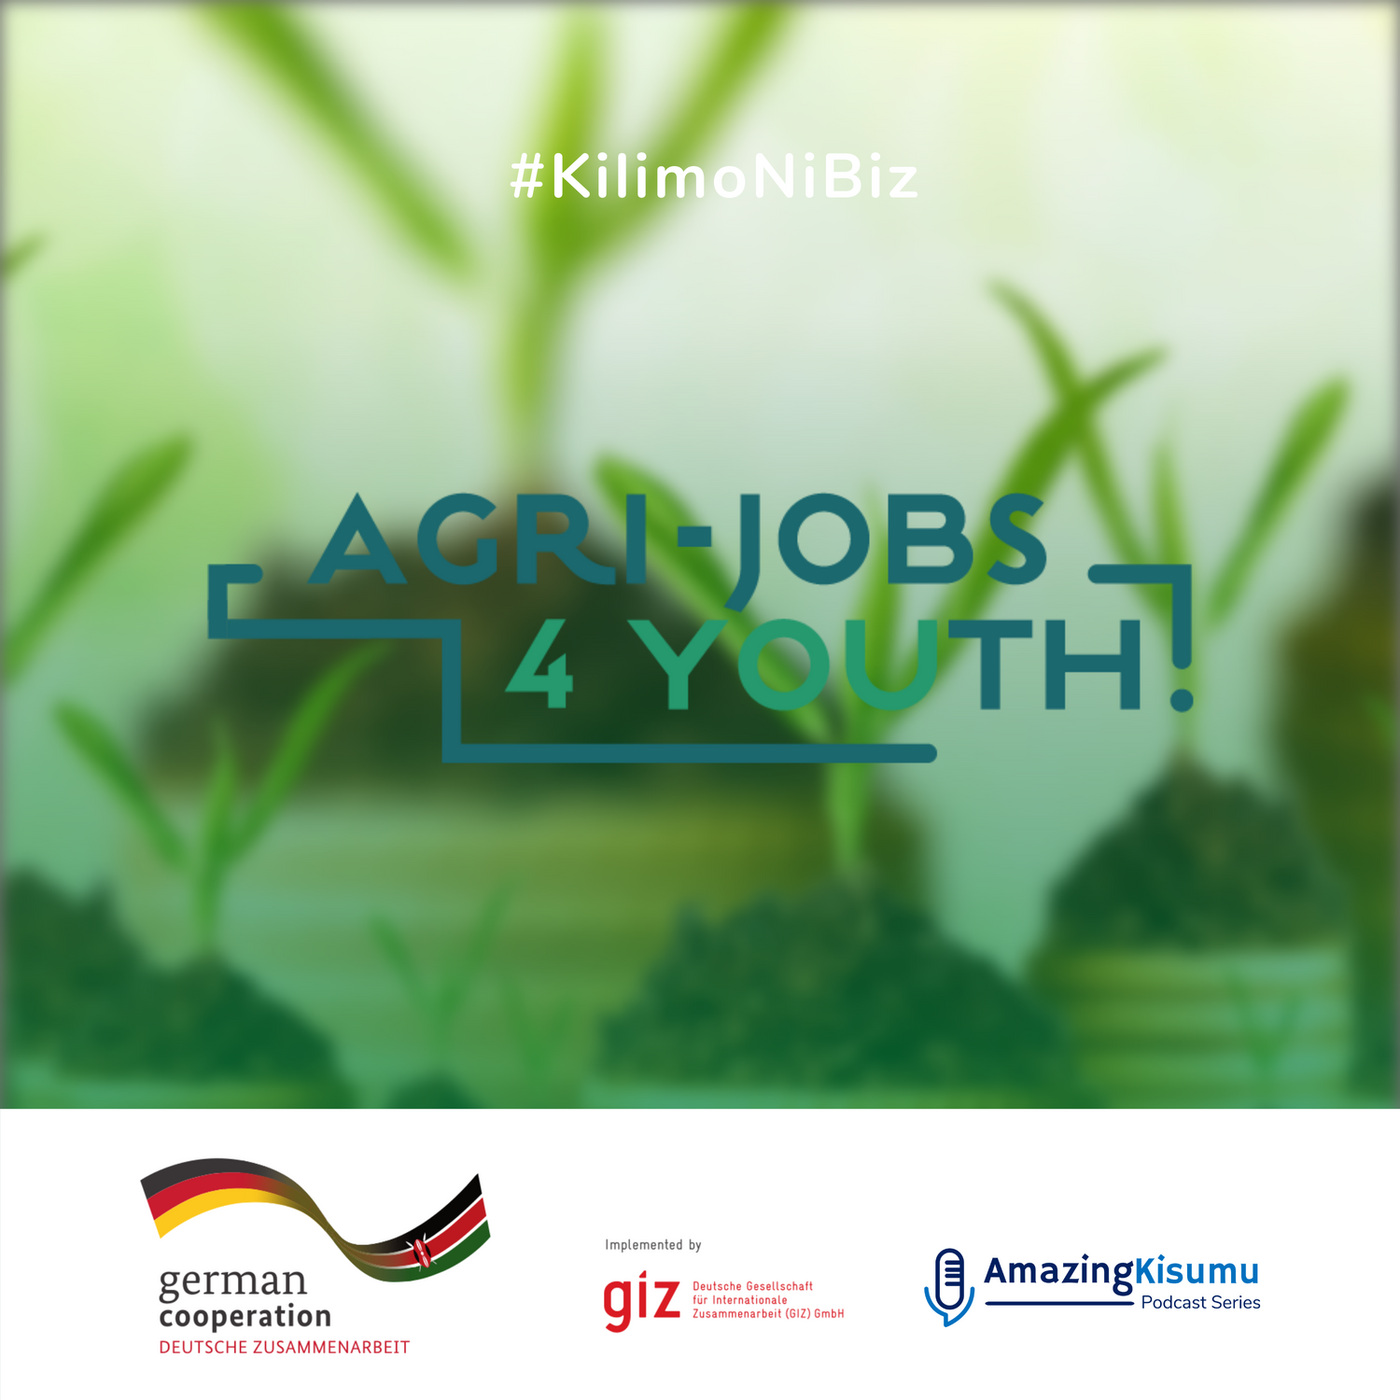 S1E1: Introduction to the Agri-Jobs 4 Youth Initiative